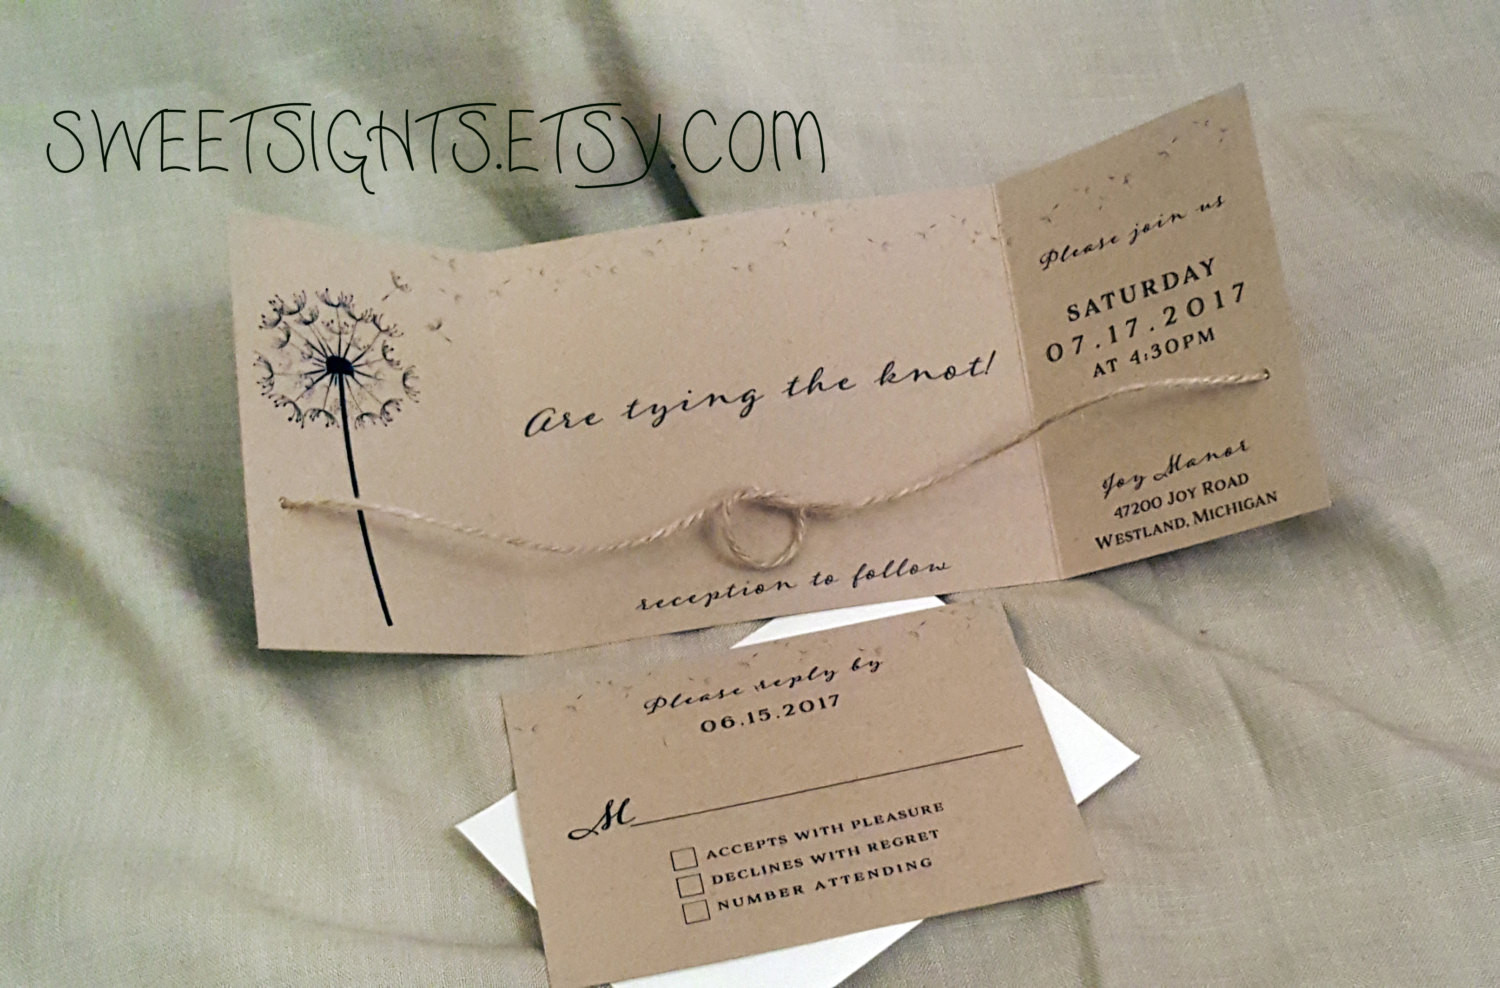 The Knot Wedding Invitations
 Tying the knot invitation 25 Tying the knot cards rustic